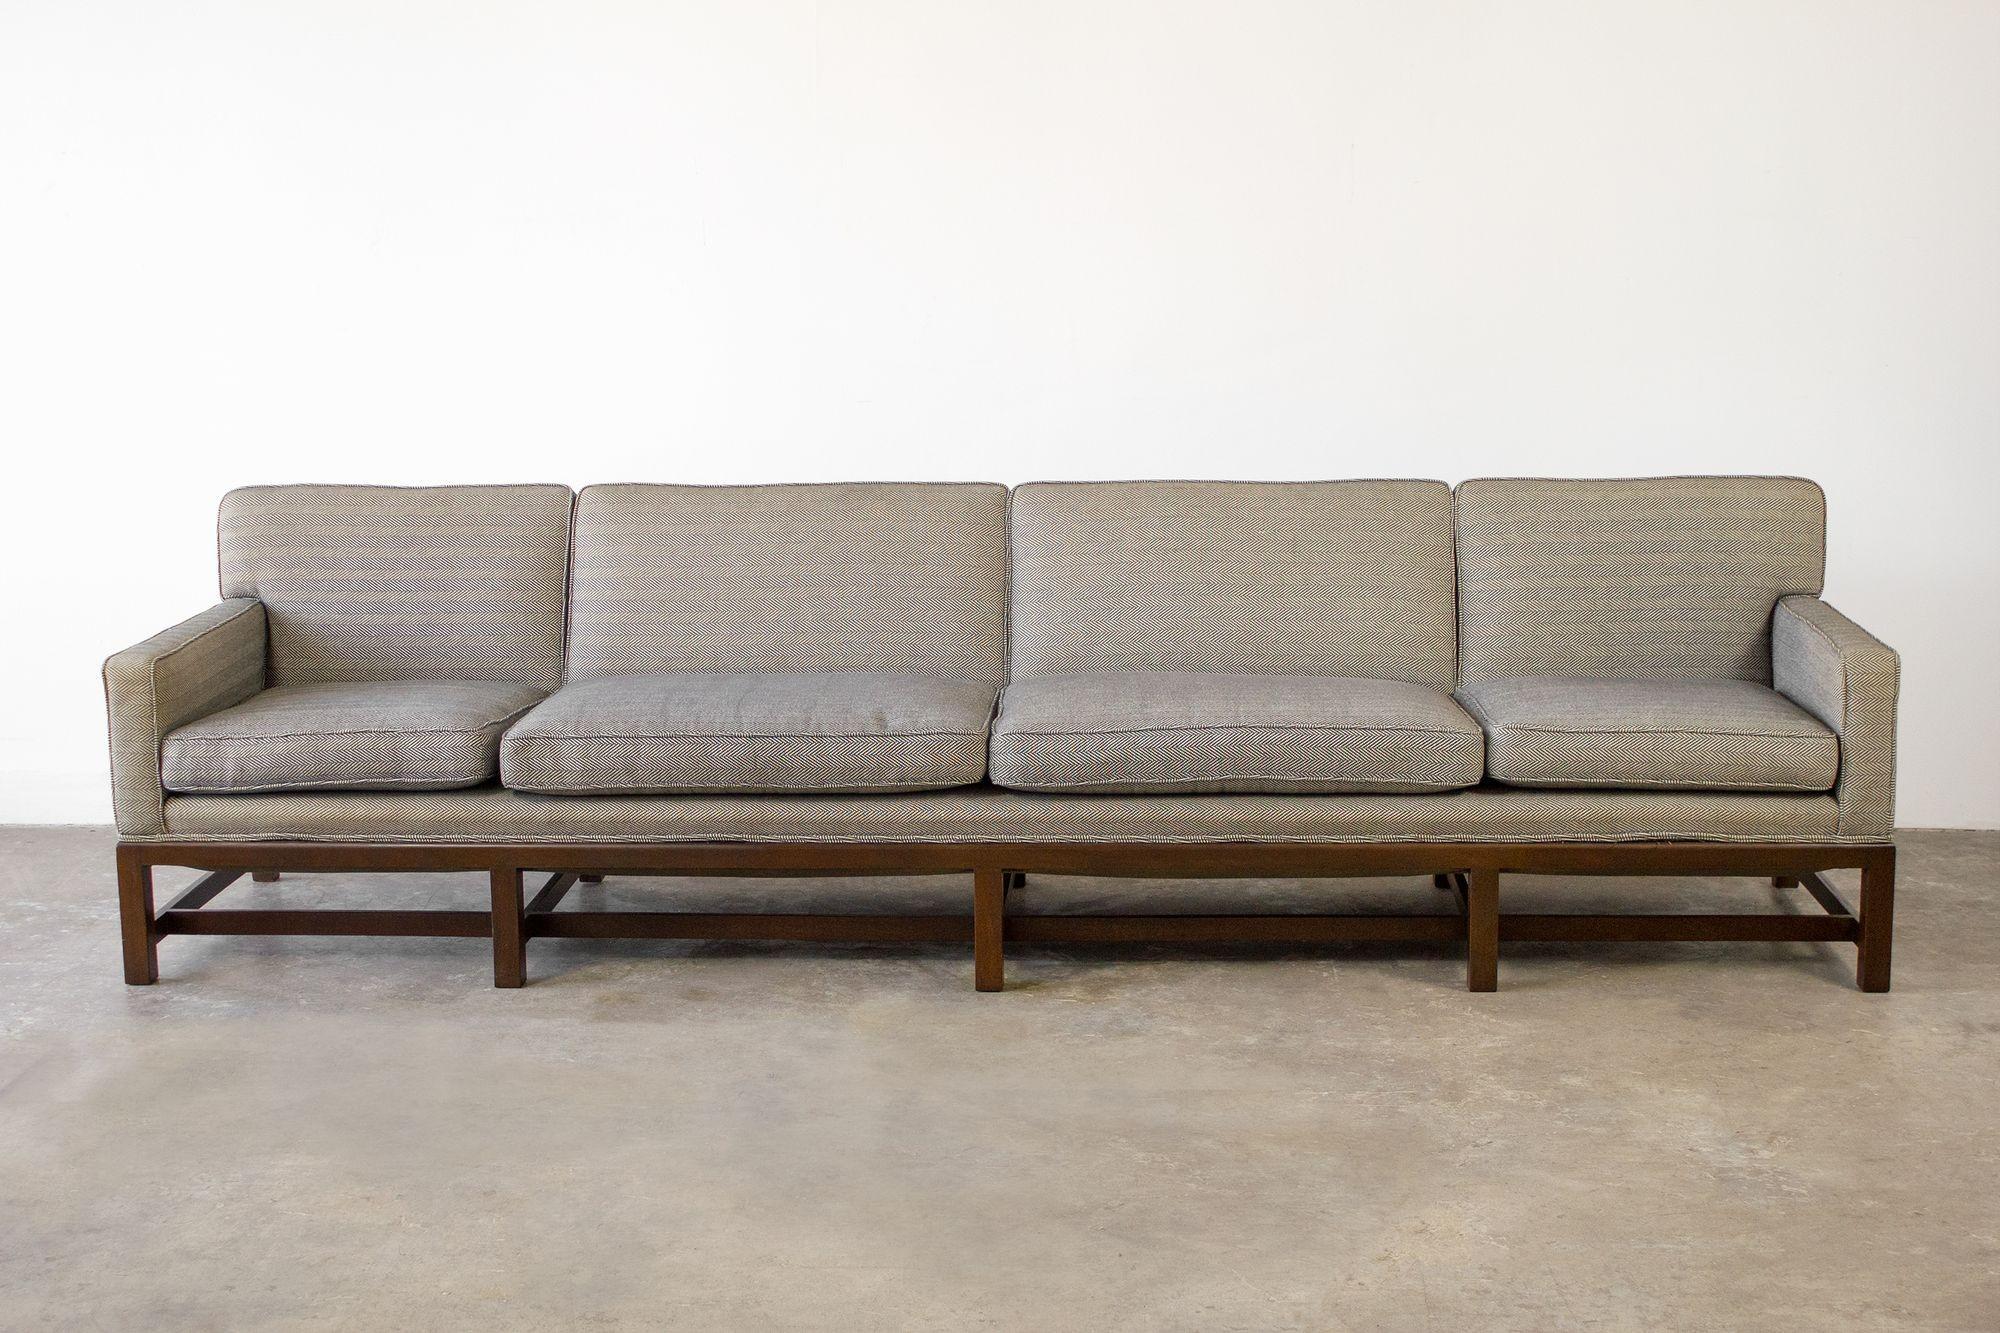 Rare and extraordinarily well-built Tommi Parzinger Sofa. This sofa was acquired from the original owners in south Florida who were friends of Tommi Parzinger. He designed every inch of their mid-century modern home on the waterway. The original